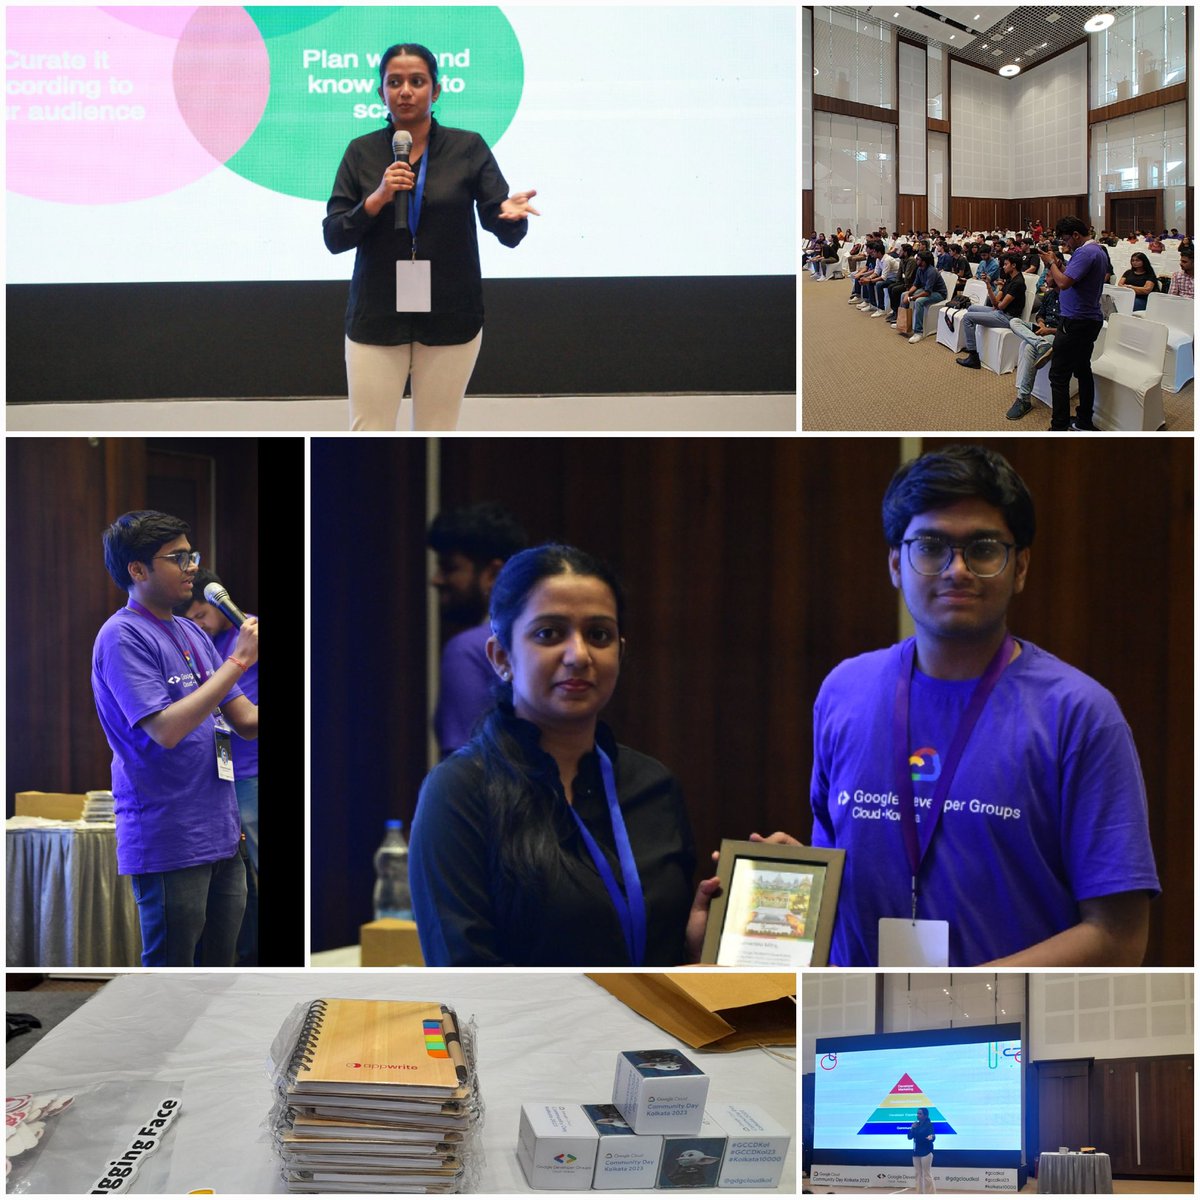 It was the first time that I managed community relations, became an anchor, and handled the whole community track in #GCCDKol where @HaimantikaM shared some great insights on community building and then we had some fun discussions with reputed community leaders in Eastern India.